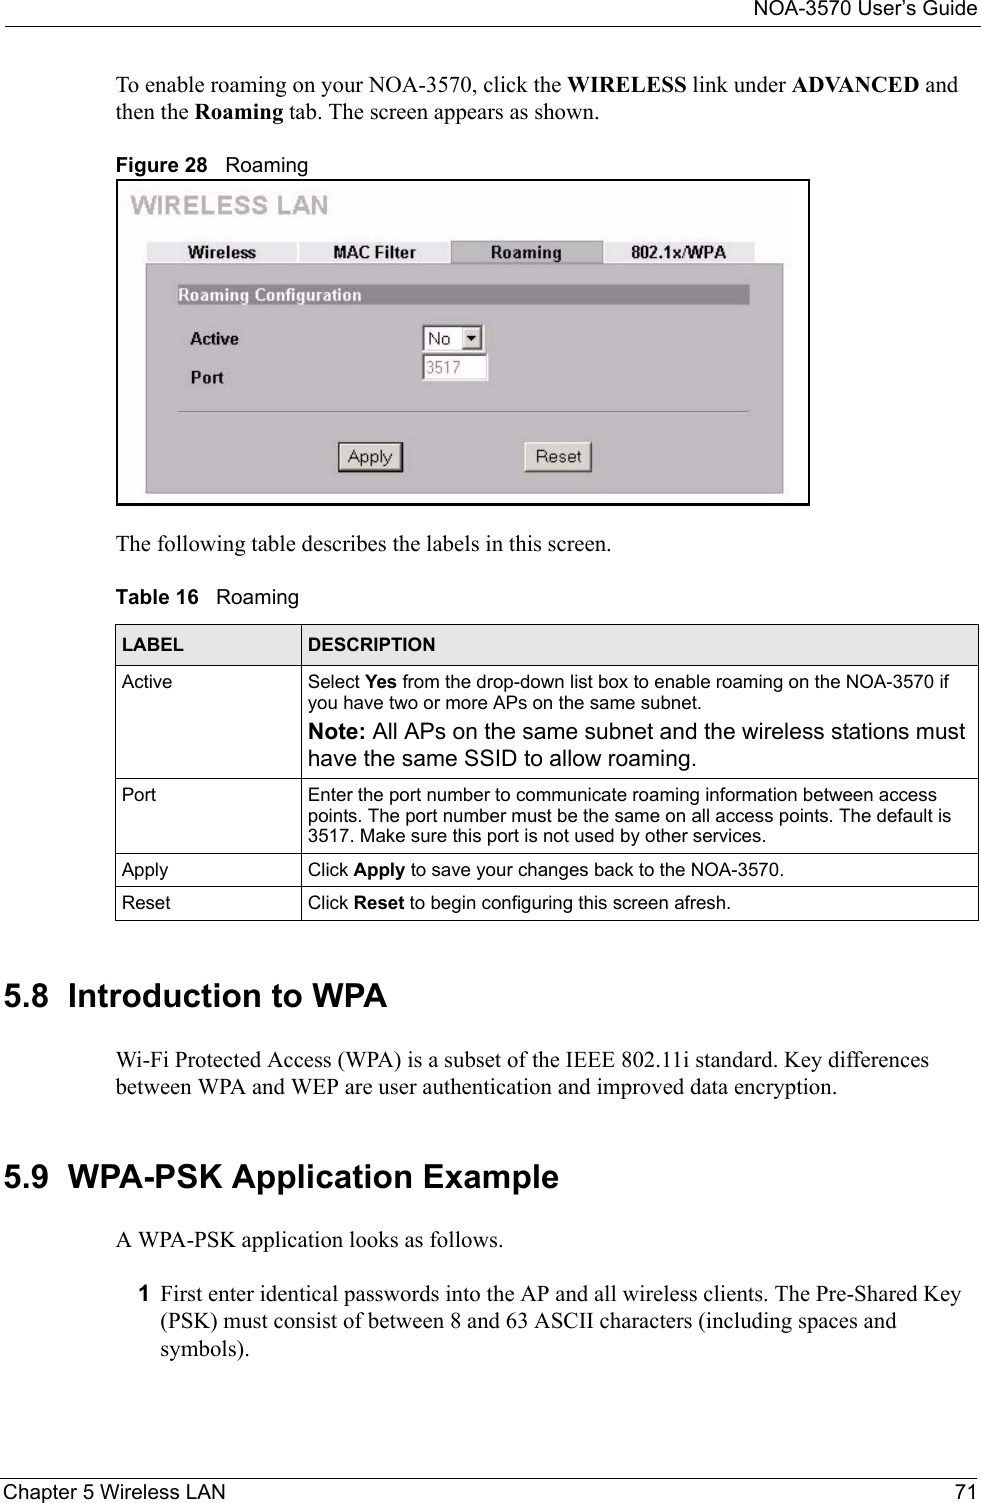 NOA-3570 User’s GuideChapter 5 Wireless LAN 71To enable roaming on your NOA-3570, click the WIRELESS link under ADVANCED and then the Roaming tab. The screen appears as shown.Figure 28   RoamingThe following table describes the labels in this screen.5.8  Introduction to WPAWi-Fi Protected Access (WPA) is a subset of the IEEE 802.11i standard. Key differences between WPA and WEP are user authentication and improved data encryption. 5.9  WPA-PSK Application ExampleA WPA-PSK application looks as follows.1First enter identical passwords into the AP and all wireless clients. The Pre-Shared Key (PSK) must consist of between 8 and 63 ASCII characters (including spaces and symbols).Table 16   RoamingLABEL DESCRIPTIONActive Select Yes from the drop-down list box to enable roaming on the NOA-3570 if you have two or more APs on the same subnet.Note: All APs on the same subnet and the wireless stations must have the same SSID to allow roaming.Port Enter the port number to communicate roaming information between access points. The port number must be the same on all access points. The default is 3517. Make sure this port is not used by other services. Apply Click Apply to save your changes back to the NOA-3570.Reset Click Reset to begin configuring this screen afresh.